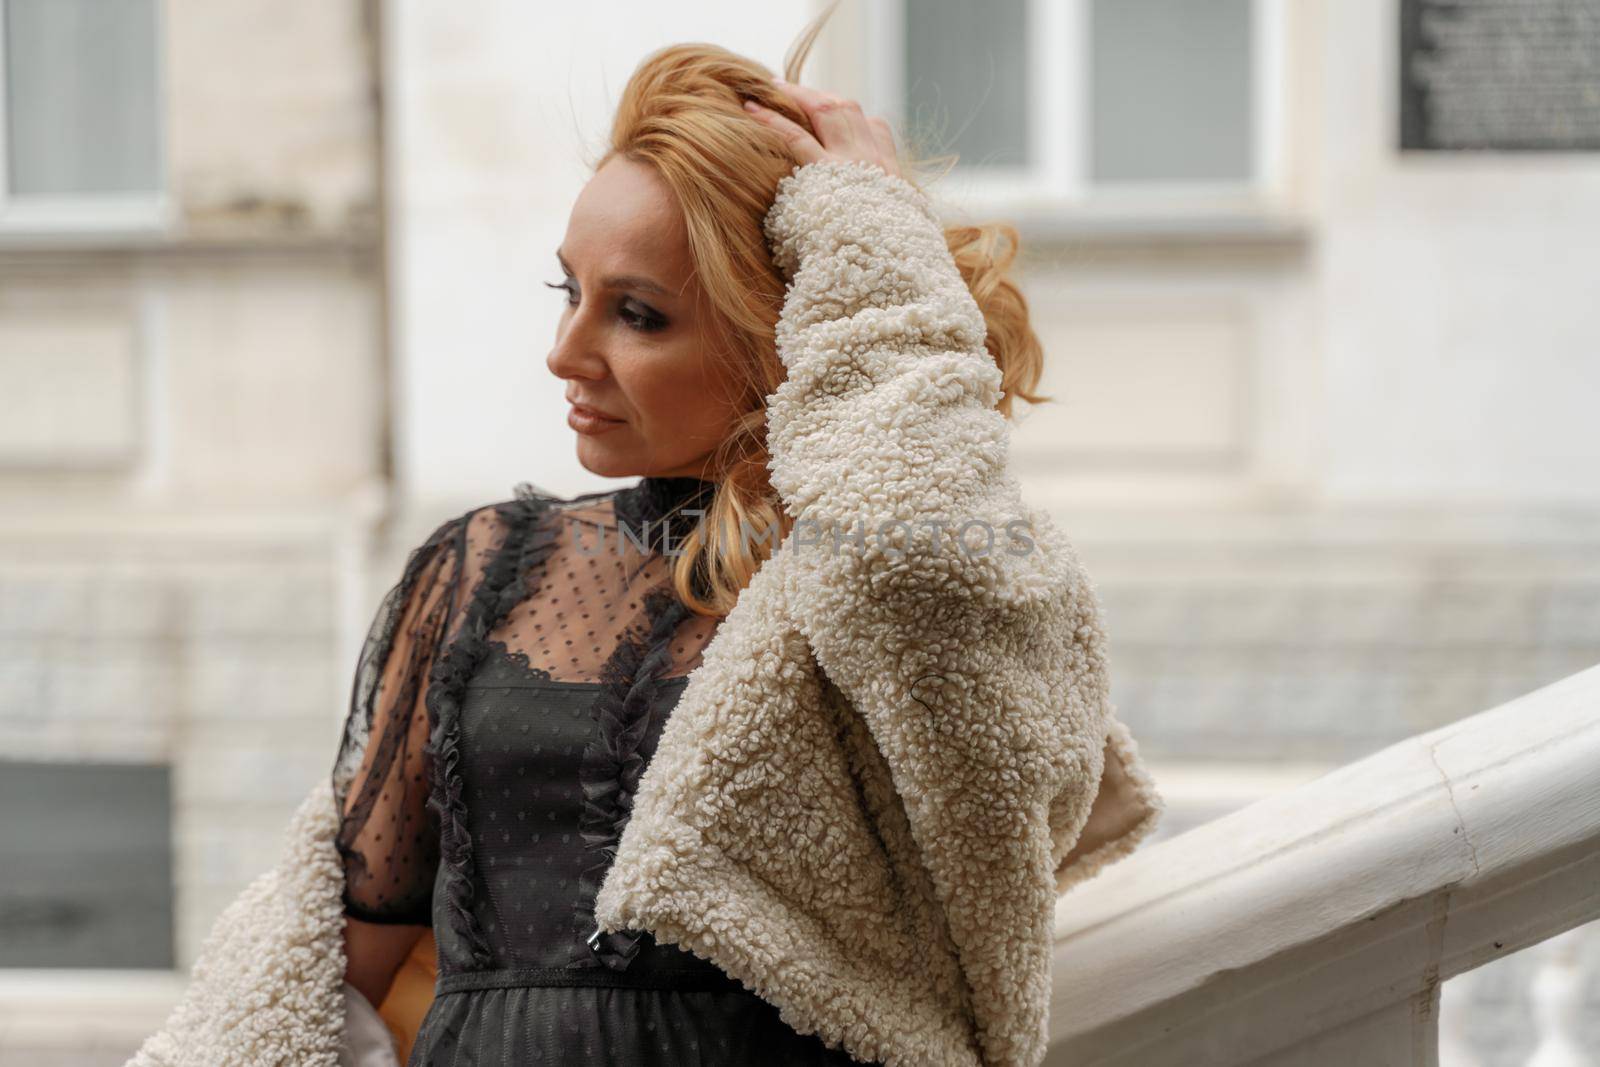 Profile of a beautiful blonde. She looks away and smiles. She is dressed in a black lace dress and a milky faux fur coat